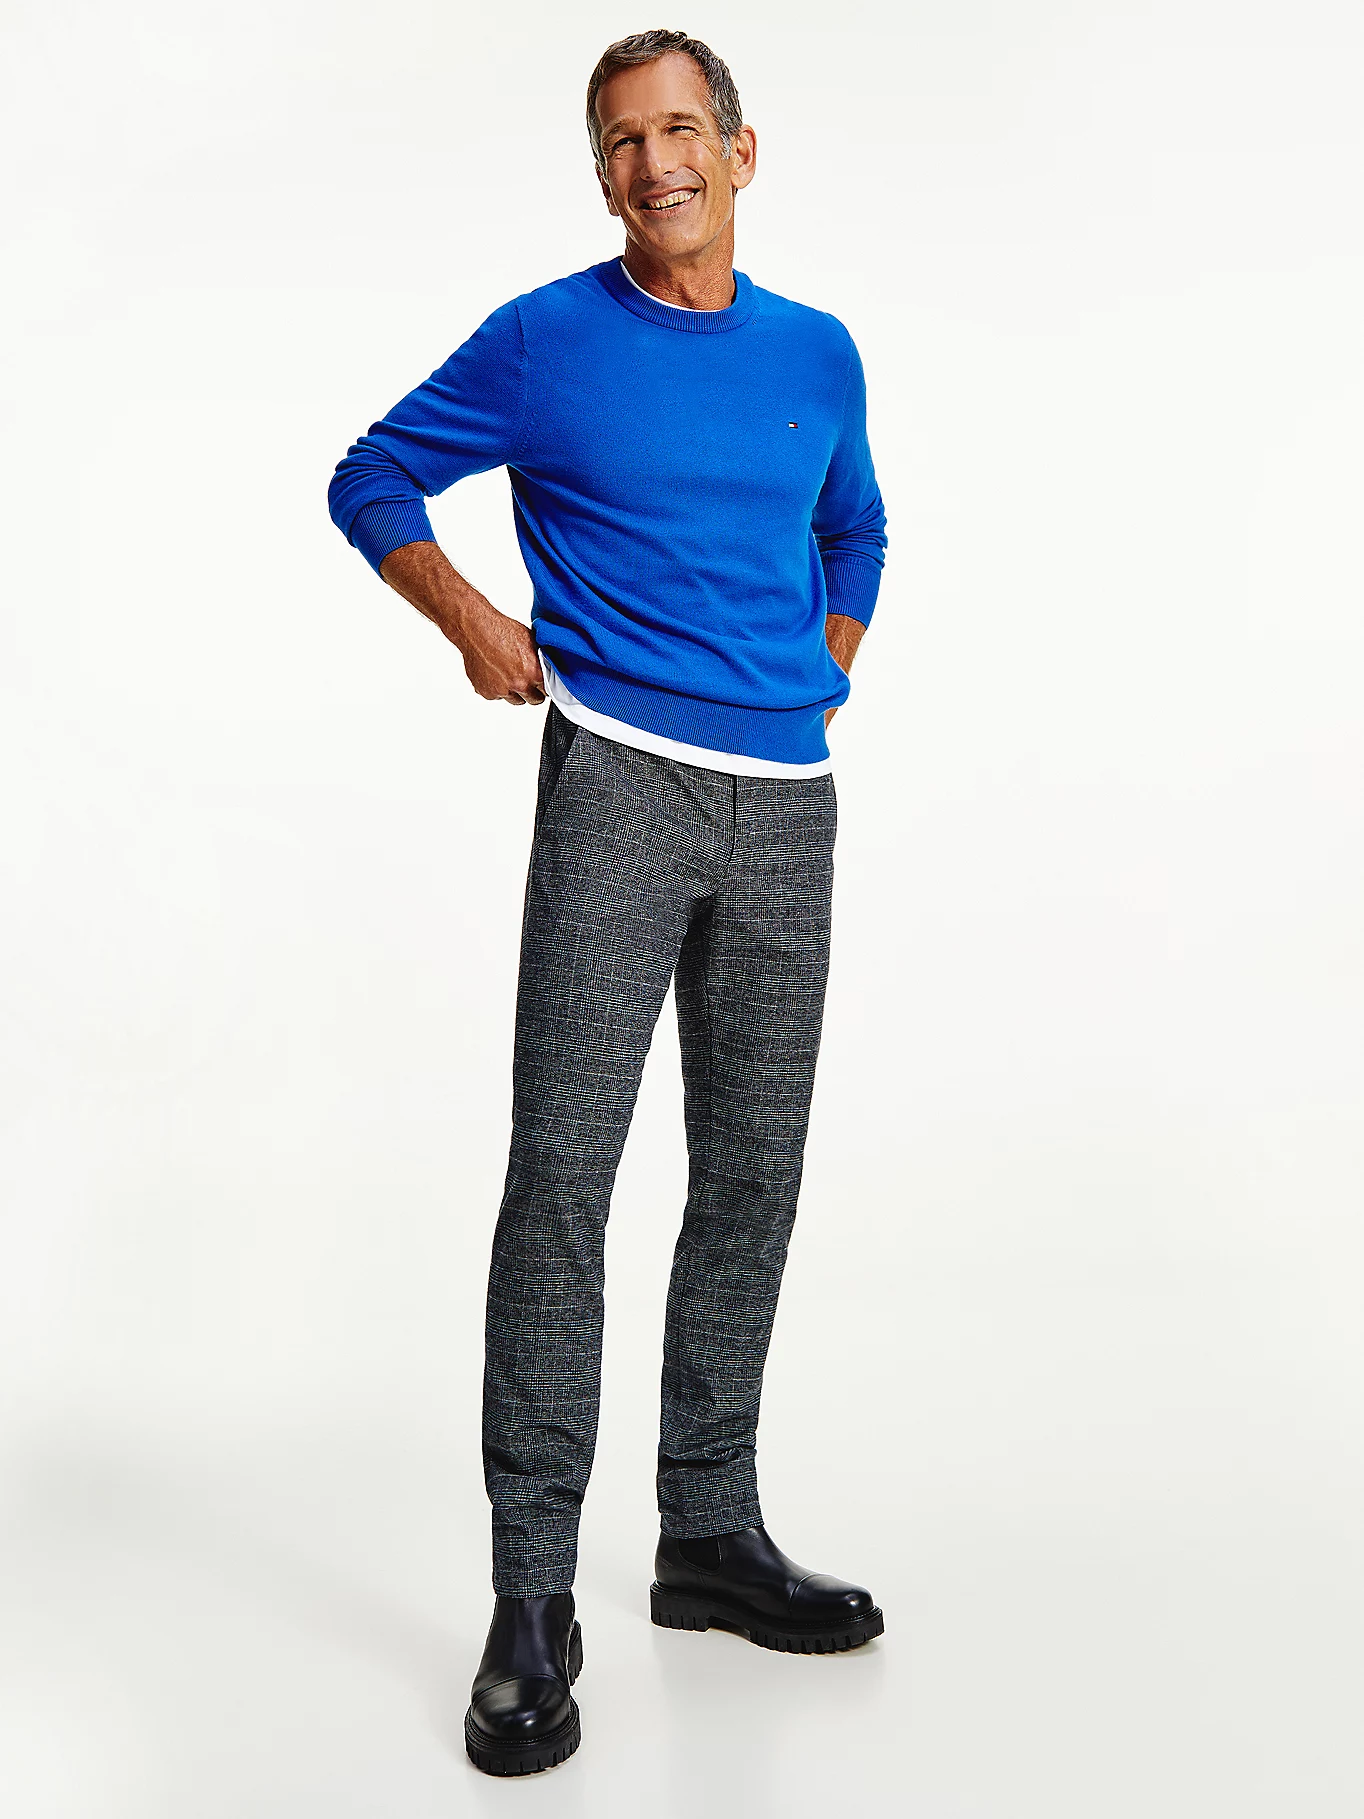 Men's crew neck pullover in cotton and cashmere